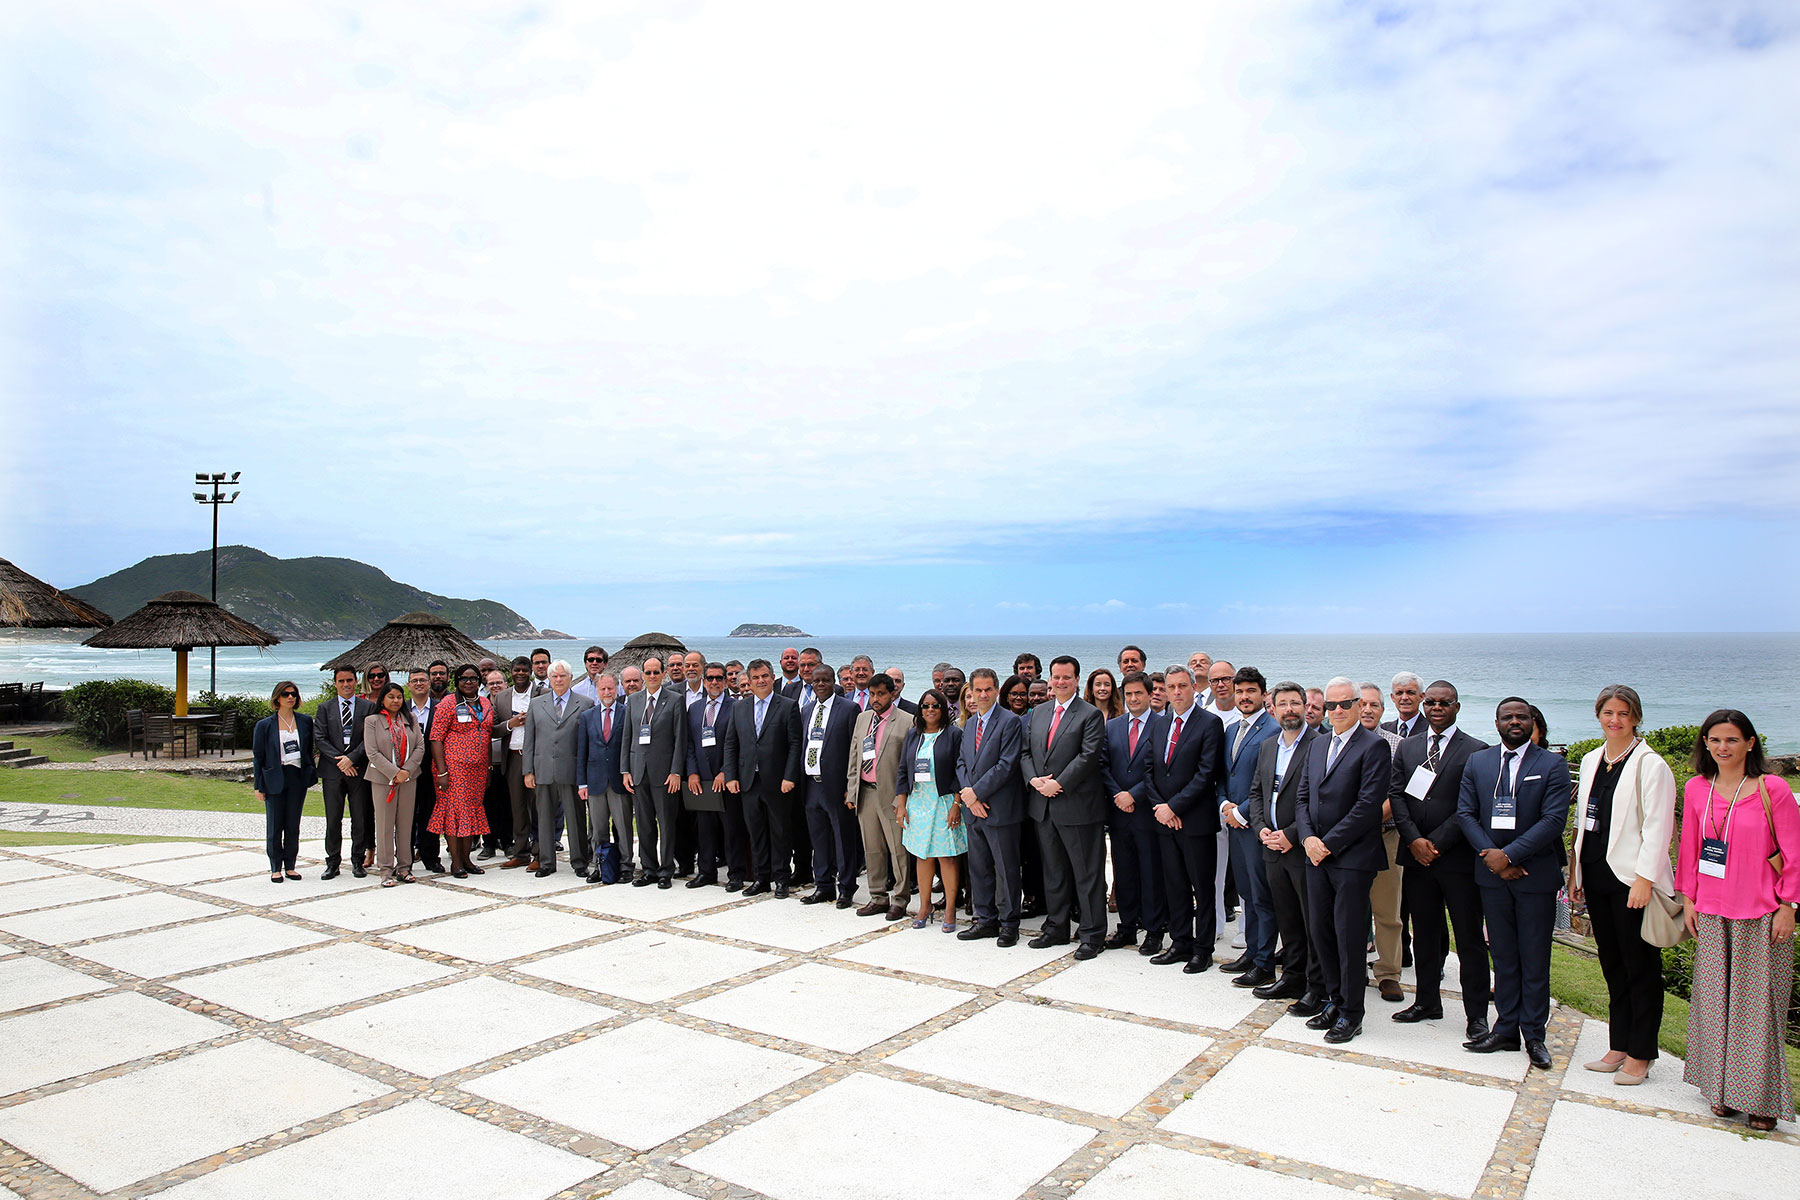 Group of attendees from the Second High-Level Industry-Science-Government Dialogue on Atlantic Interactions stand on the beach in Florianopolis, Brazil